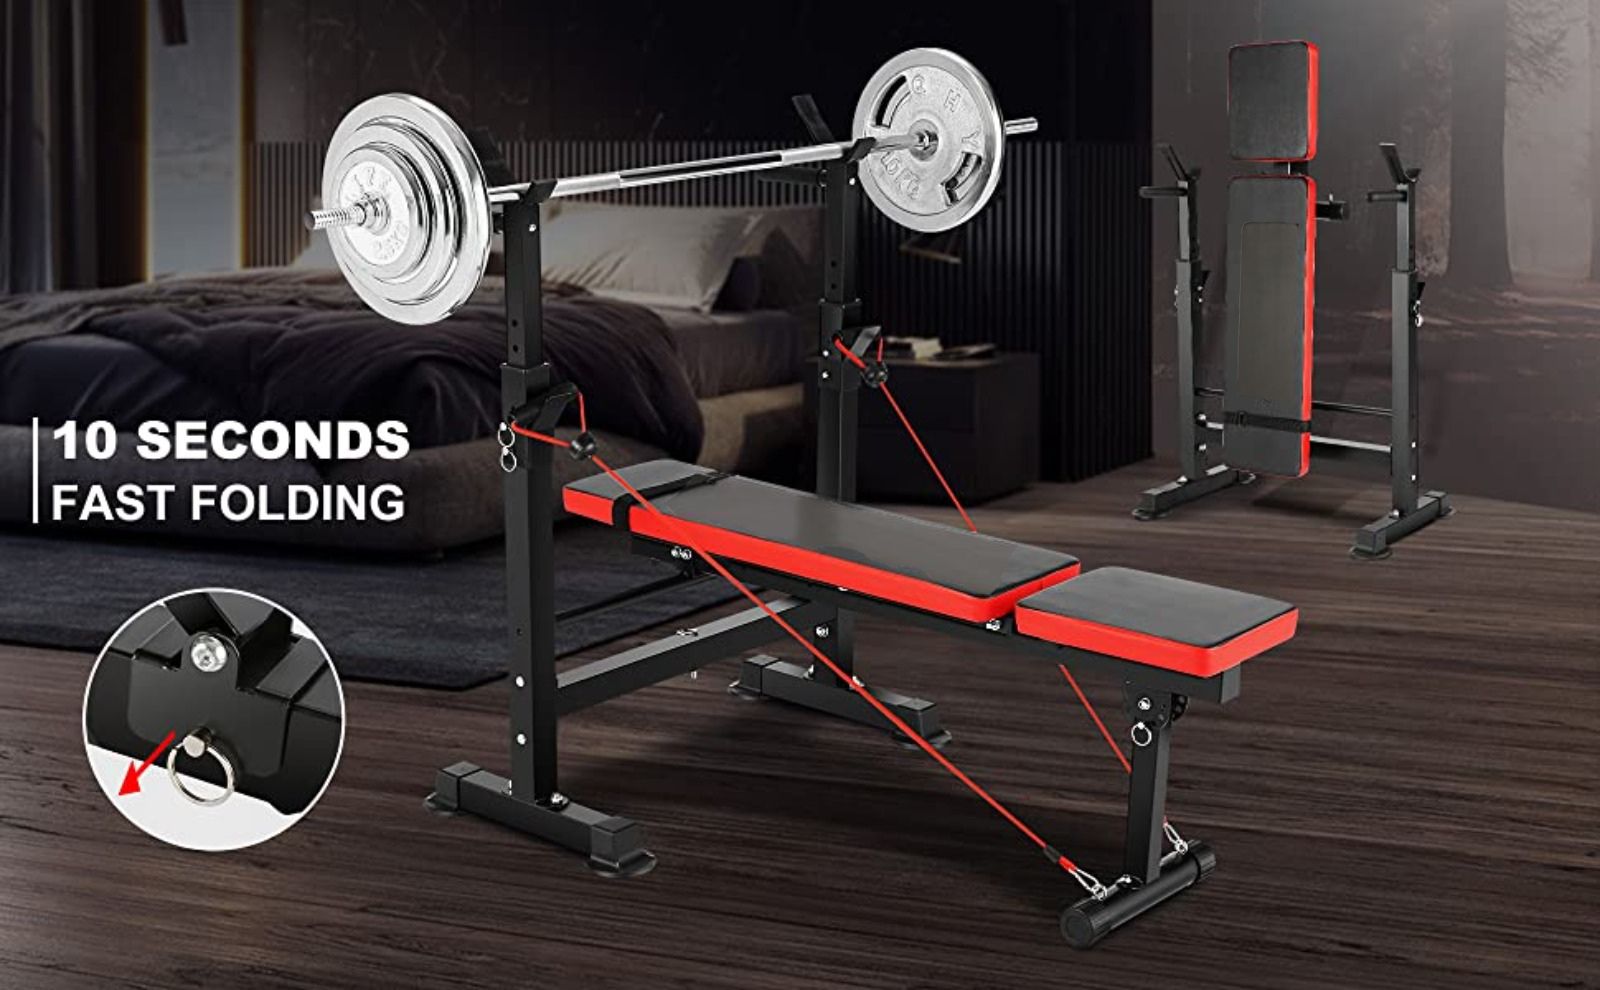  Gym & Fitness Benches